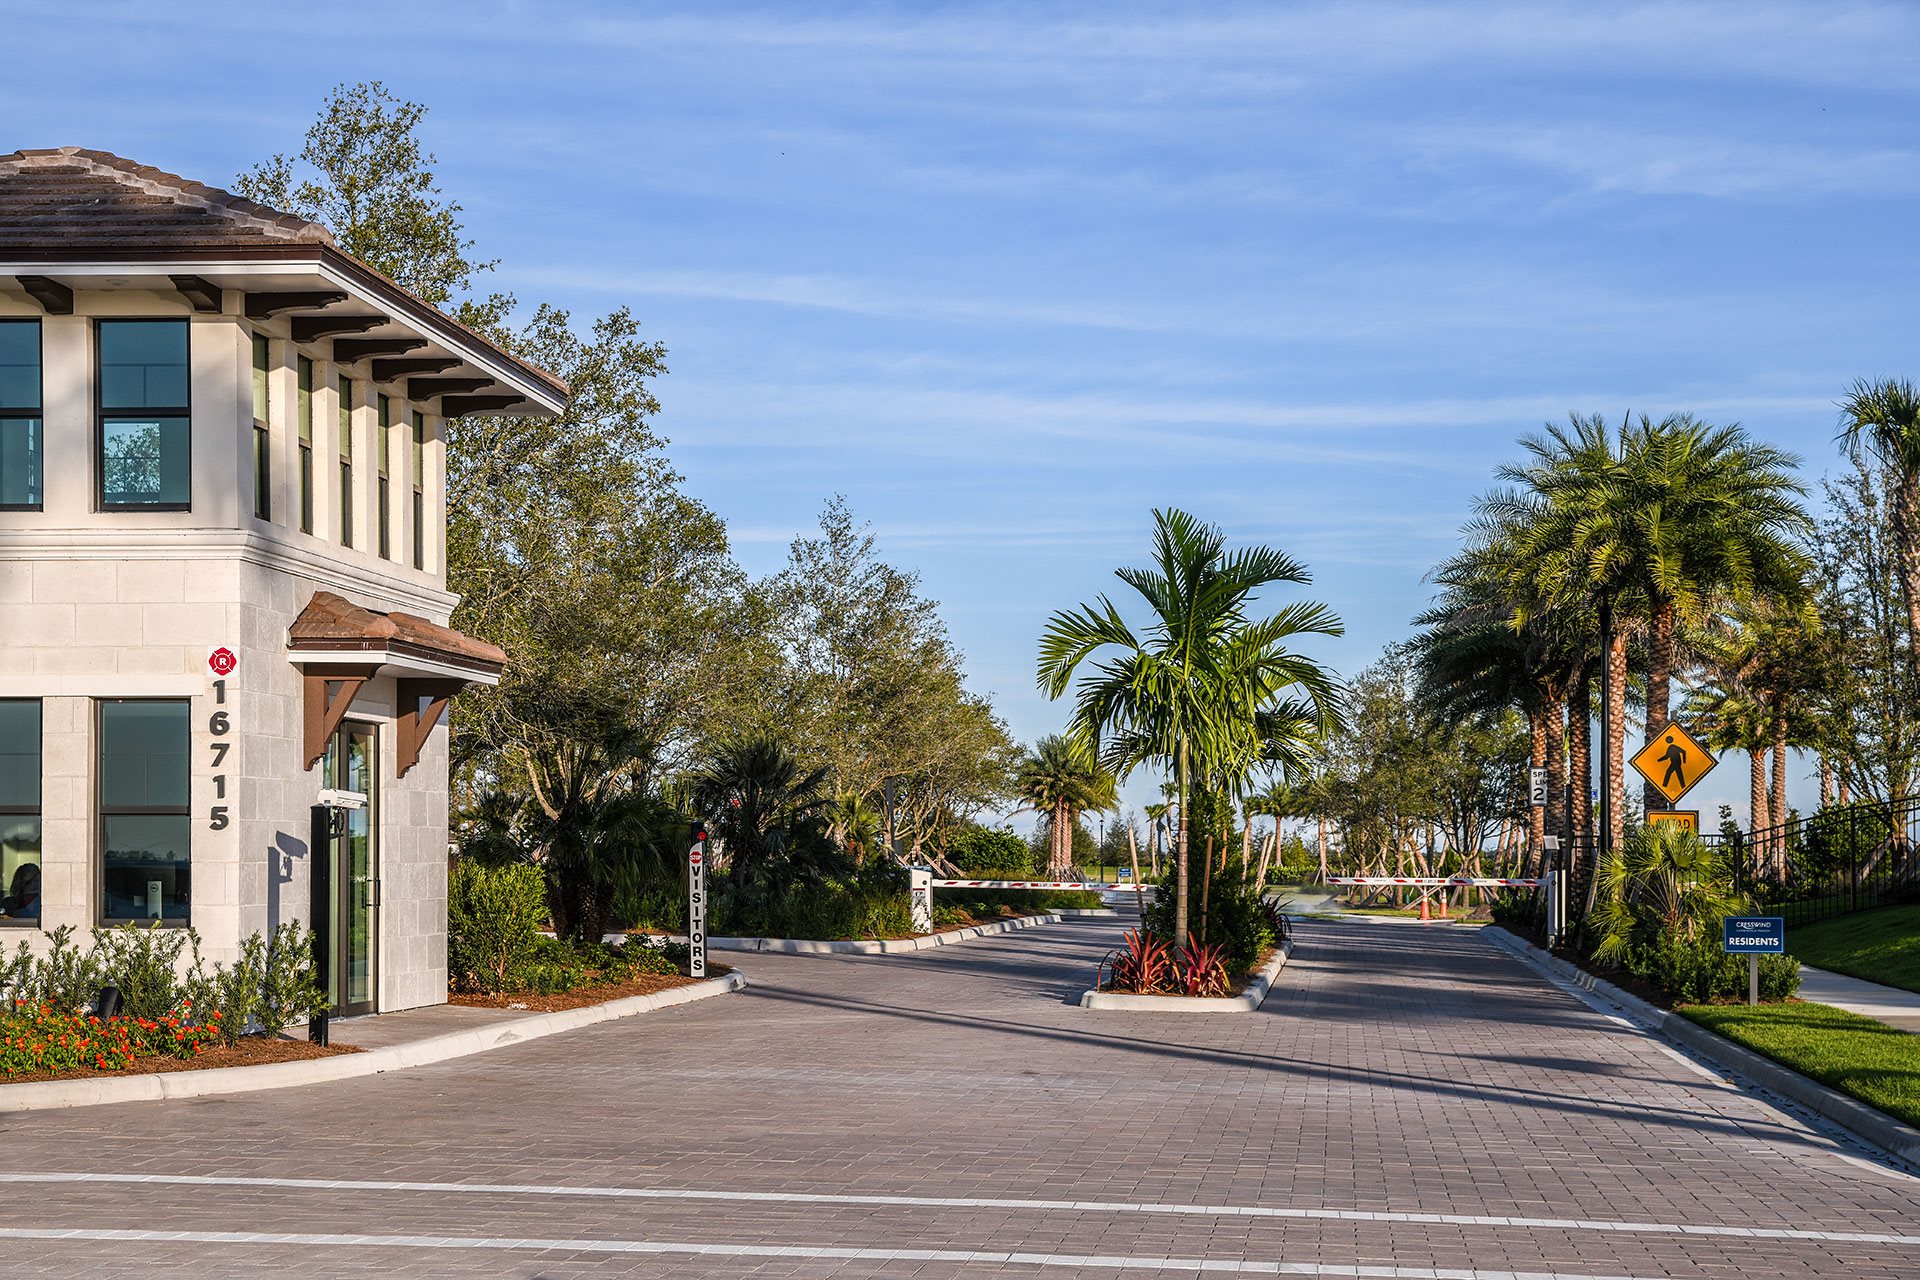 Cresswind Lakewood Ranch Community Photos and Videos